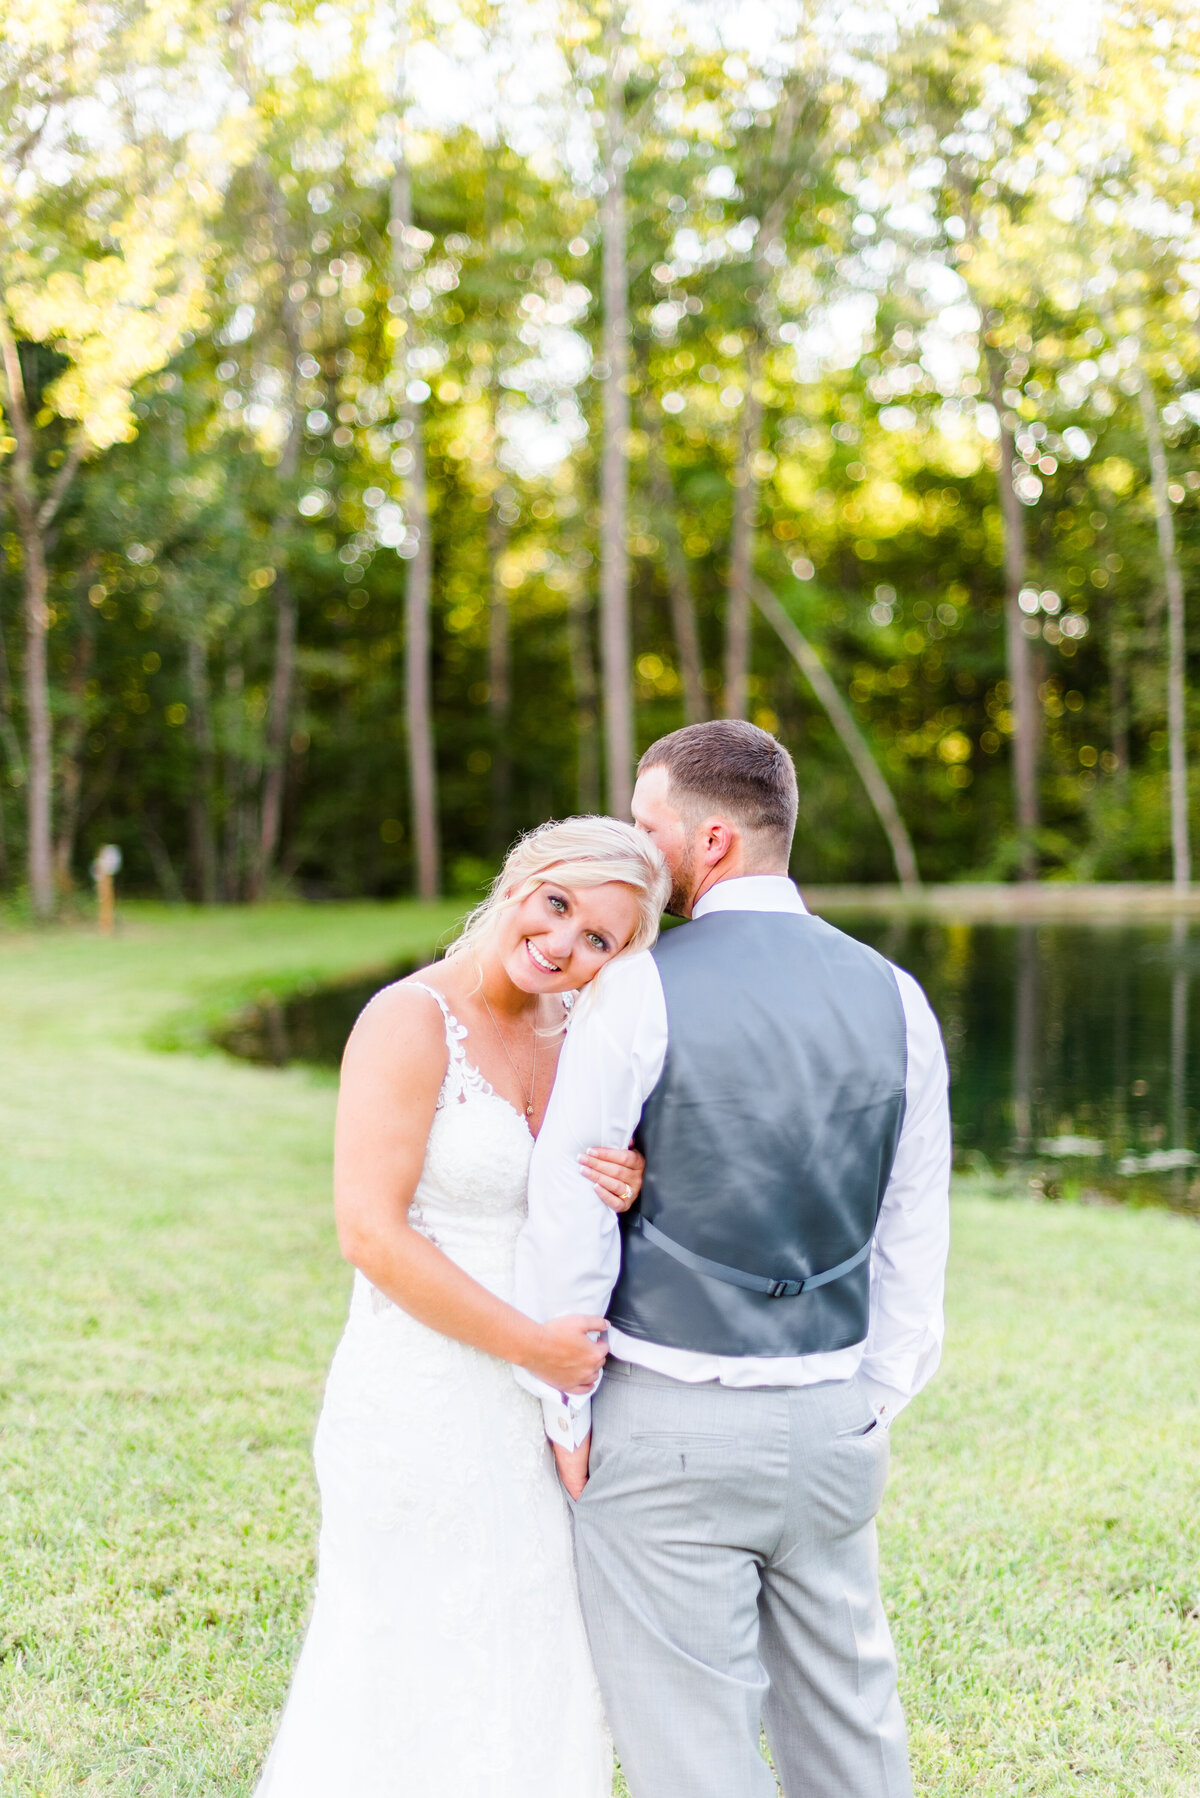 Courtney + Dylan's Wedding Day - Photography by Gerri Anna-634